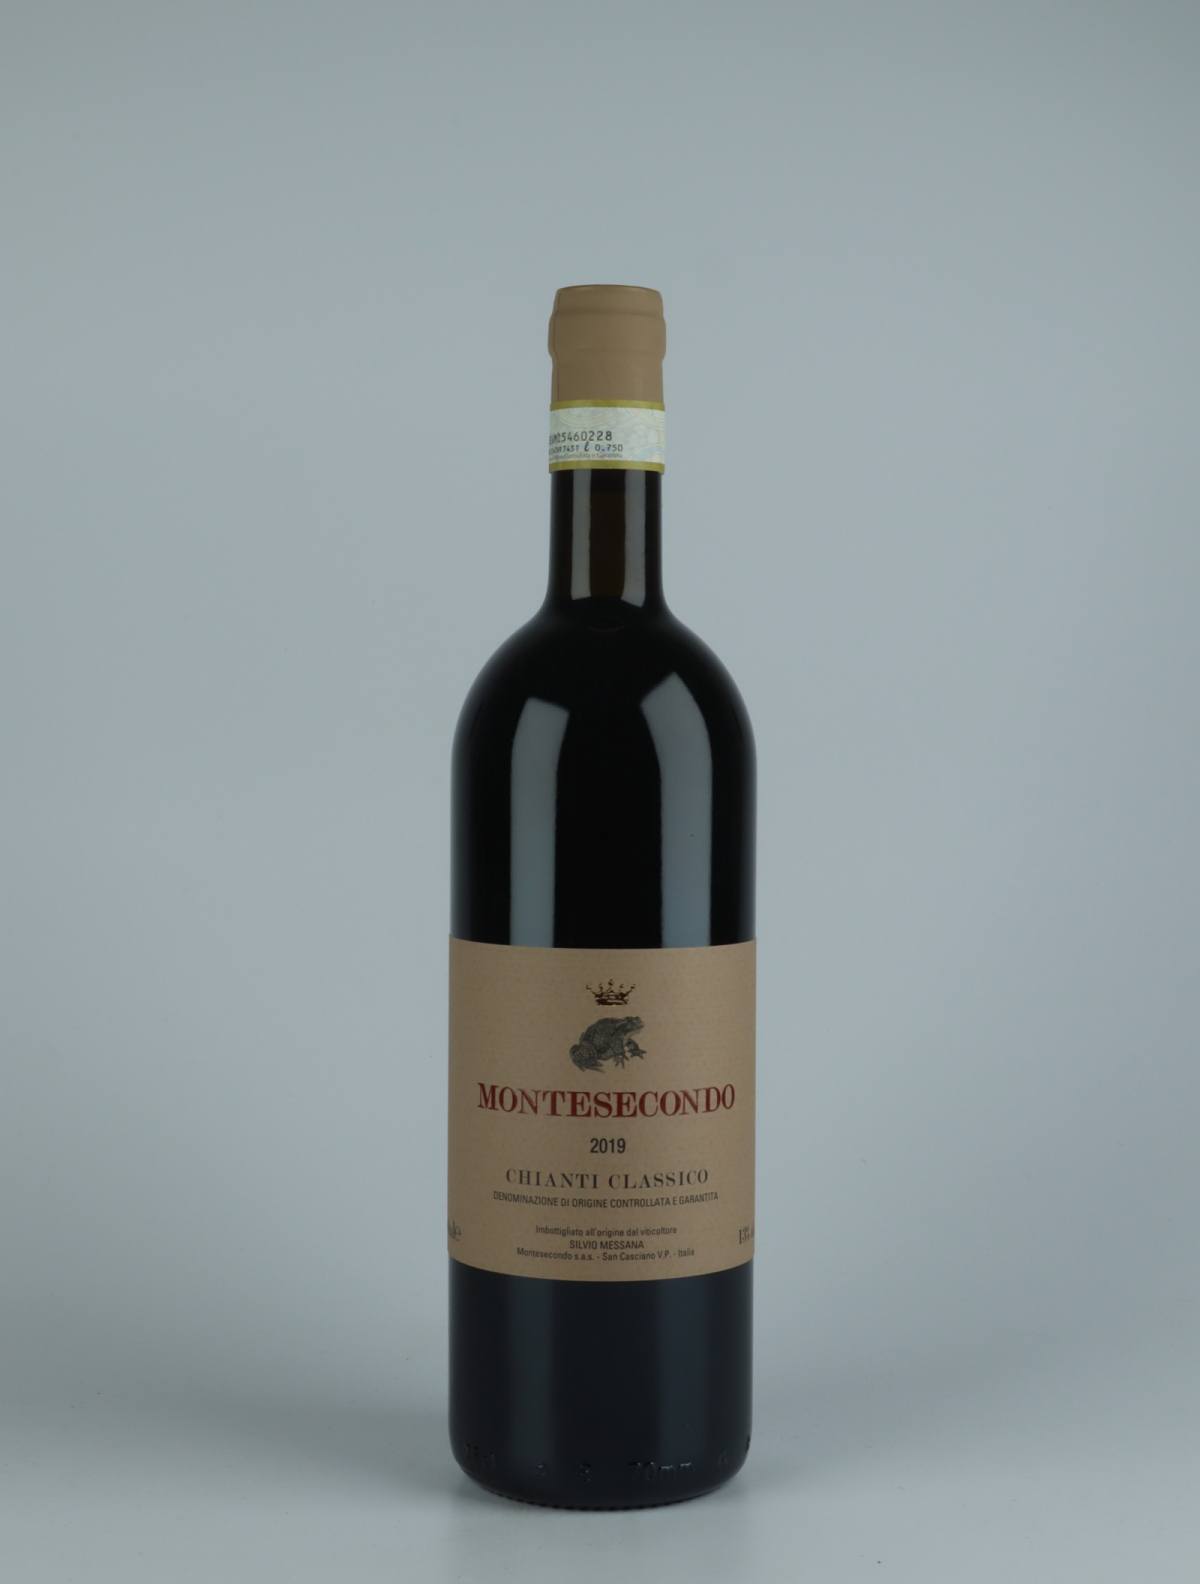 A bottle 2019 Chianti Classico Red wine from Montesecondo, Tuscany in Italy